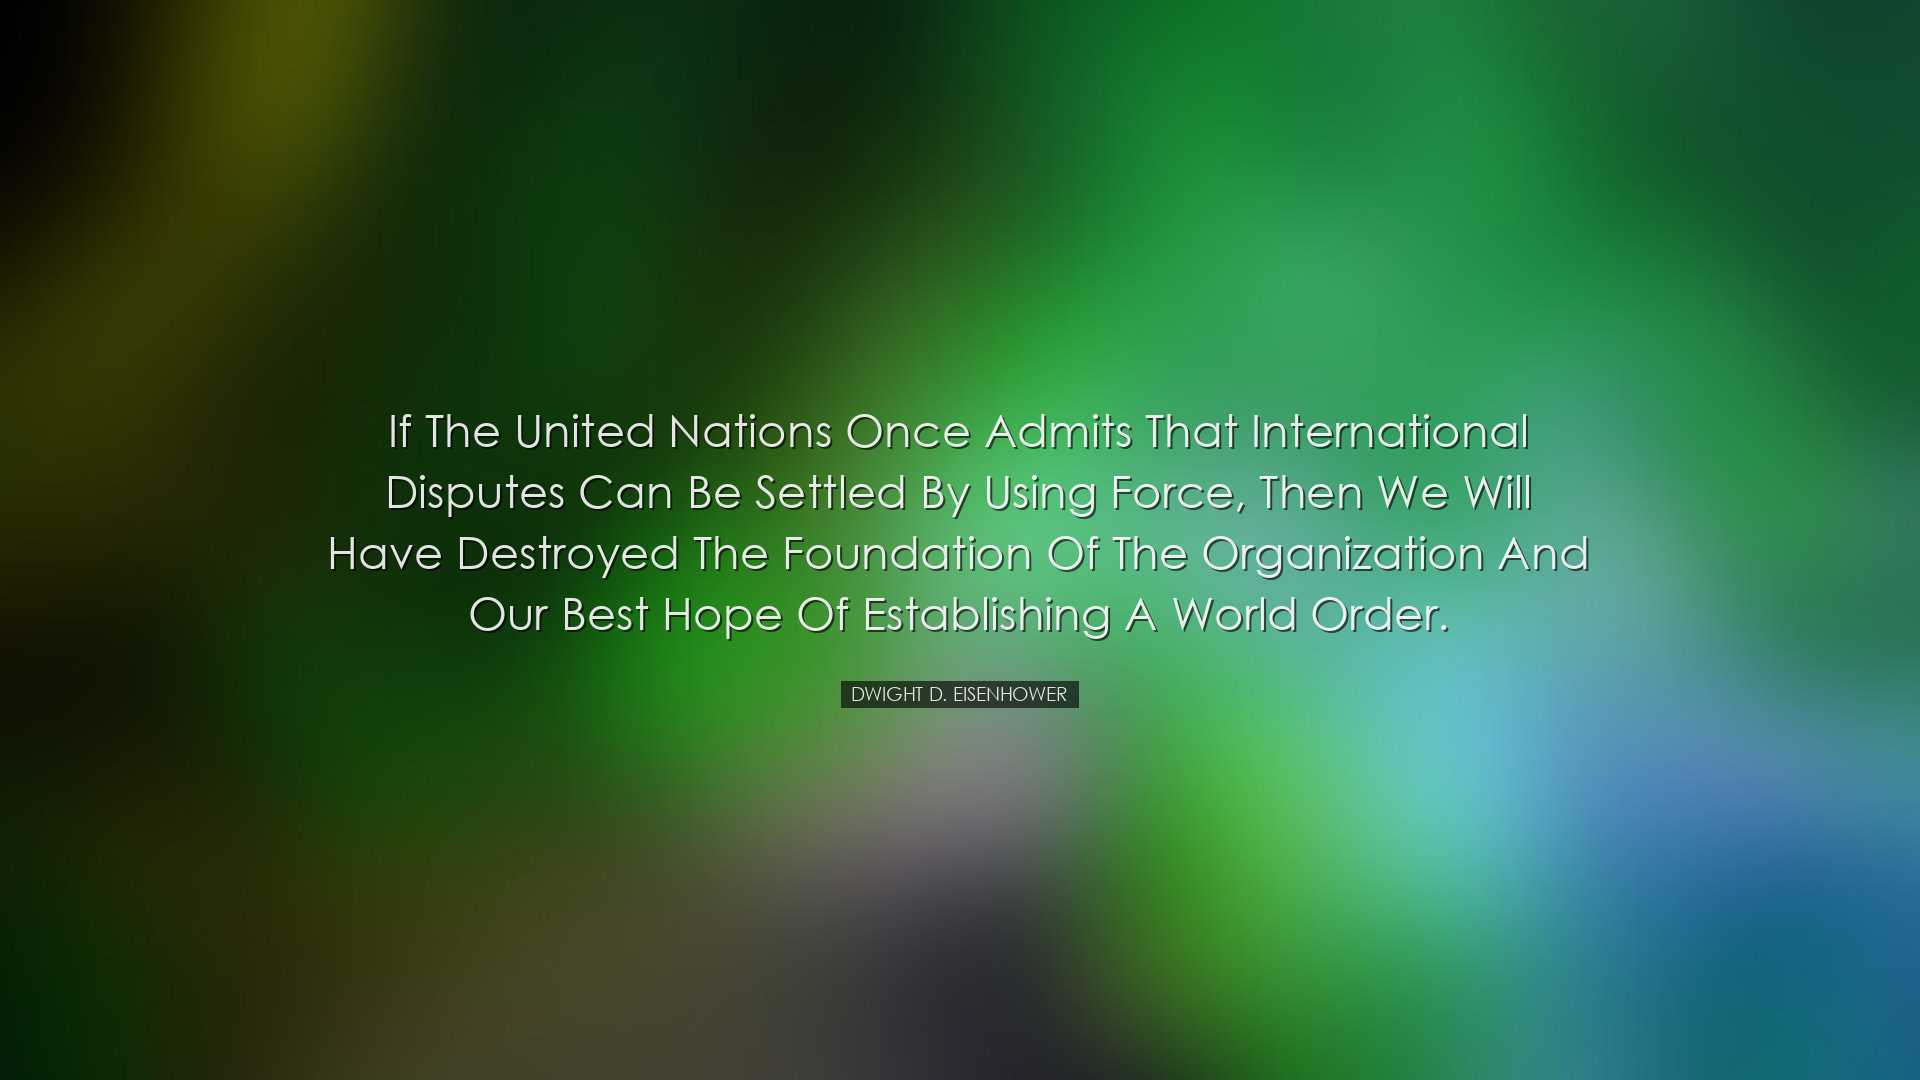 If the United Nations once admits that international disputes can